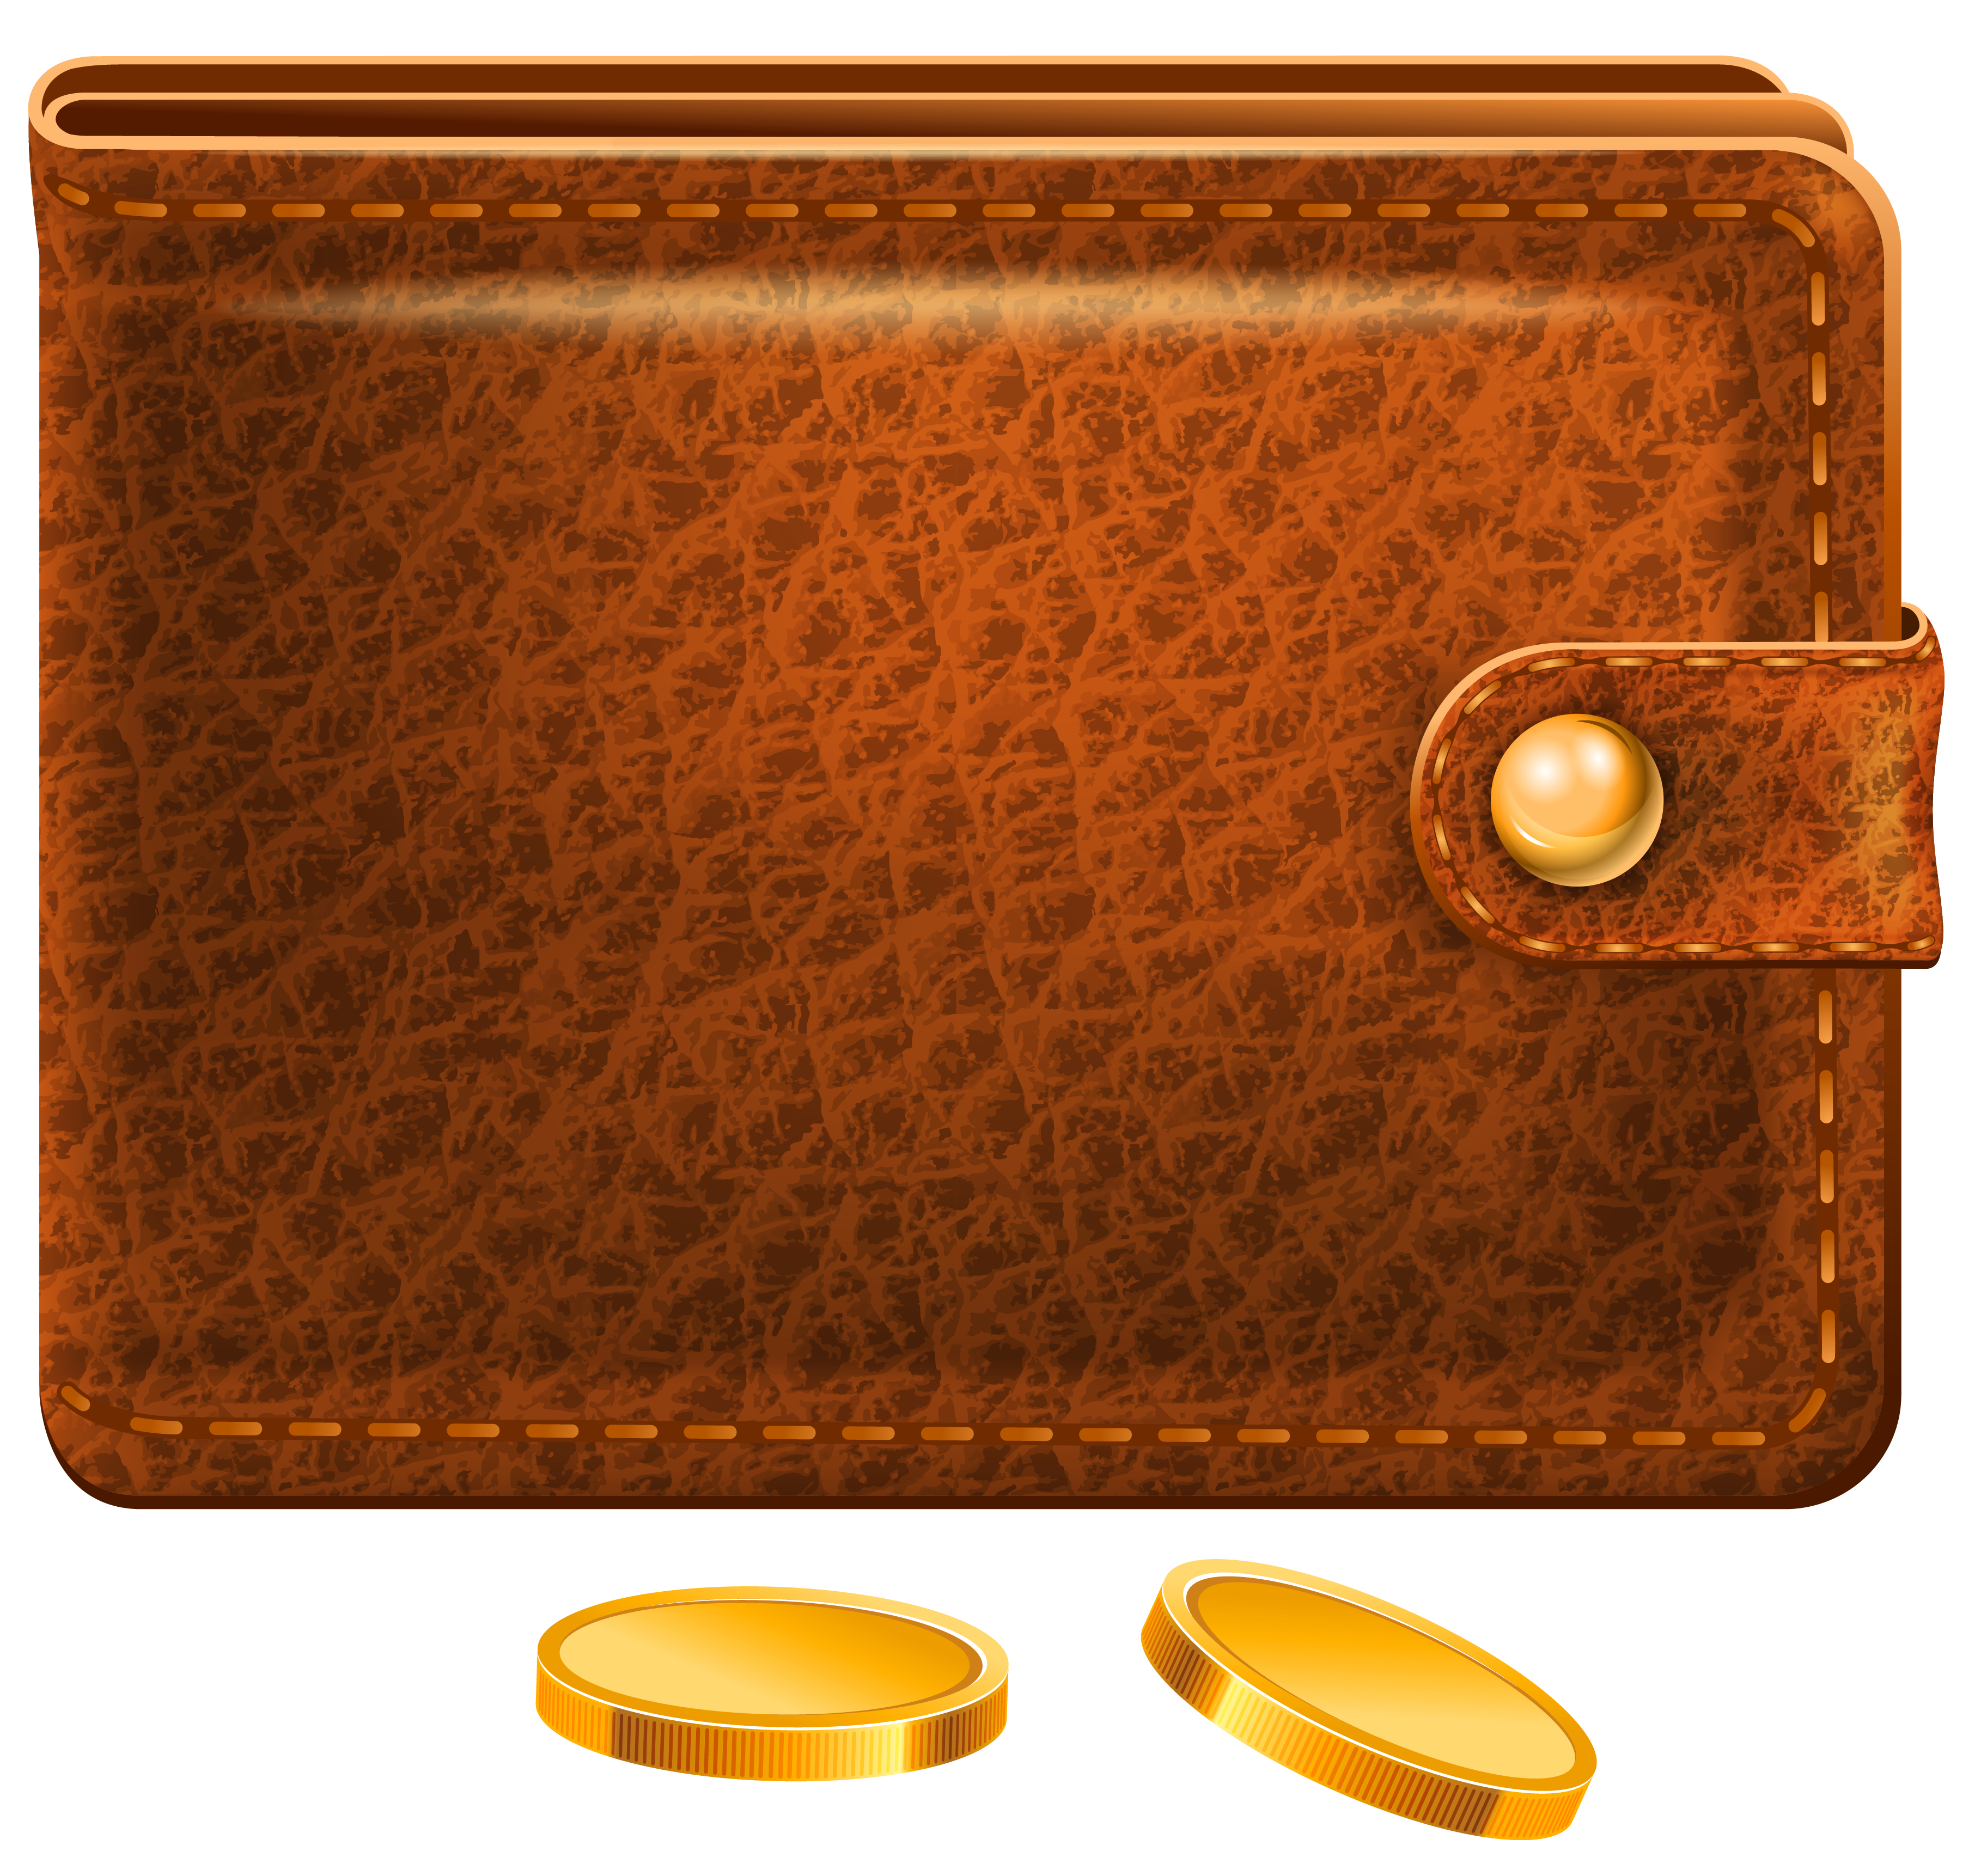 Wallet and Coins PNG HQ pngteam.com